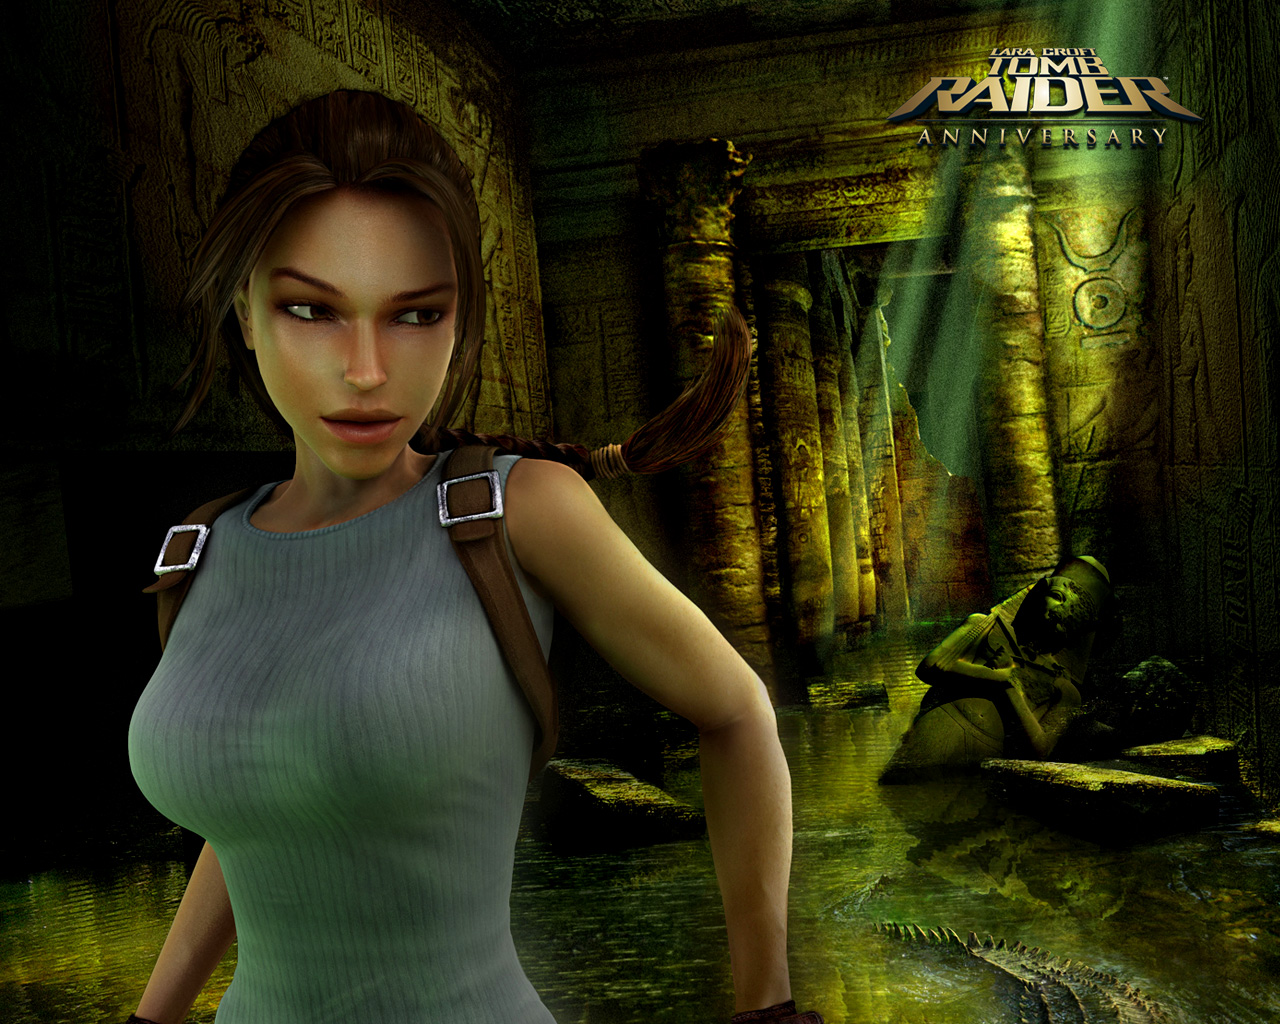 Tomb Raider: Anniversary Edition: free desktop wallpaper and background image